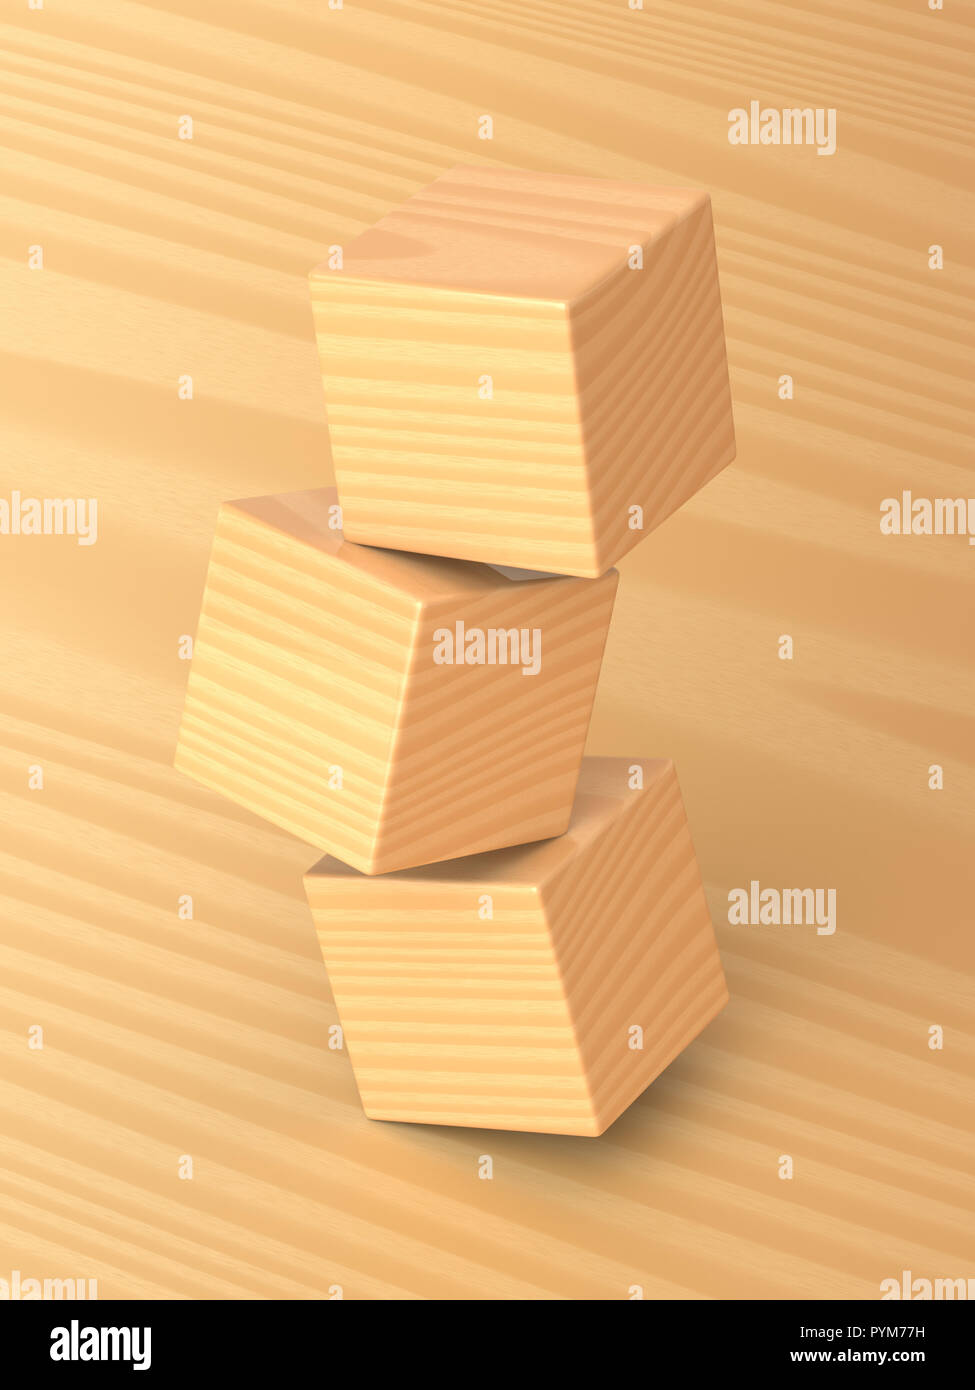 3d rendered angled view of tumbling plain wooden toy blocks on a light wood background. Stock Photo